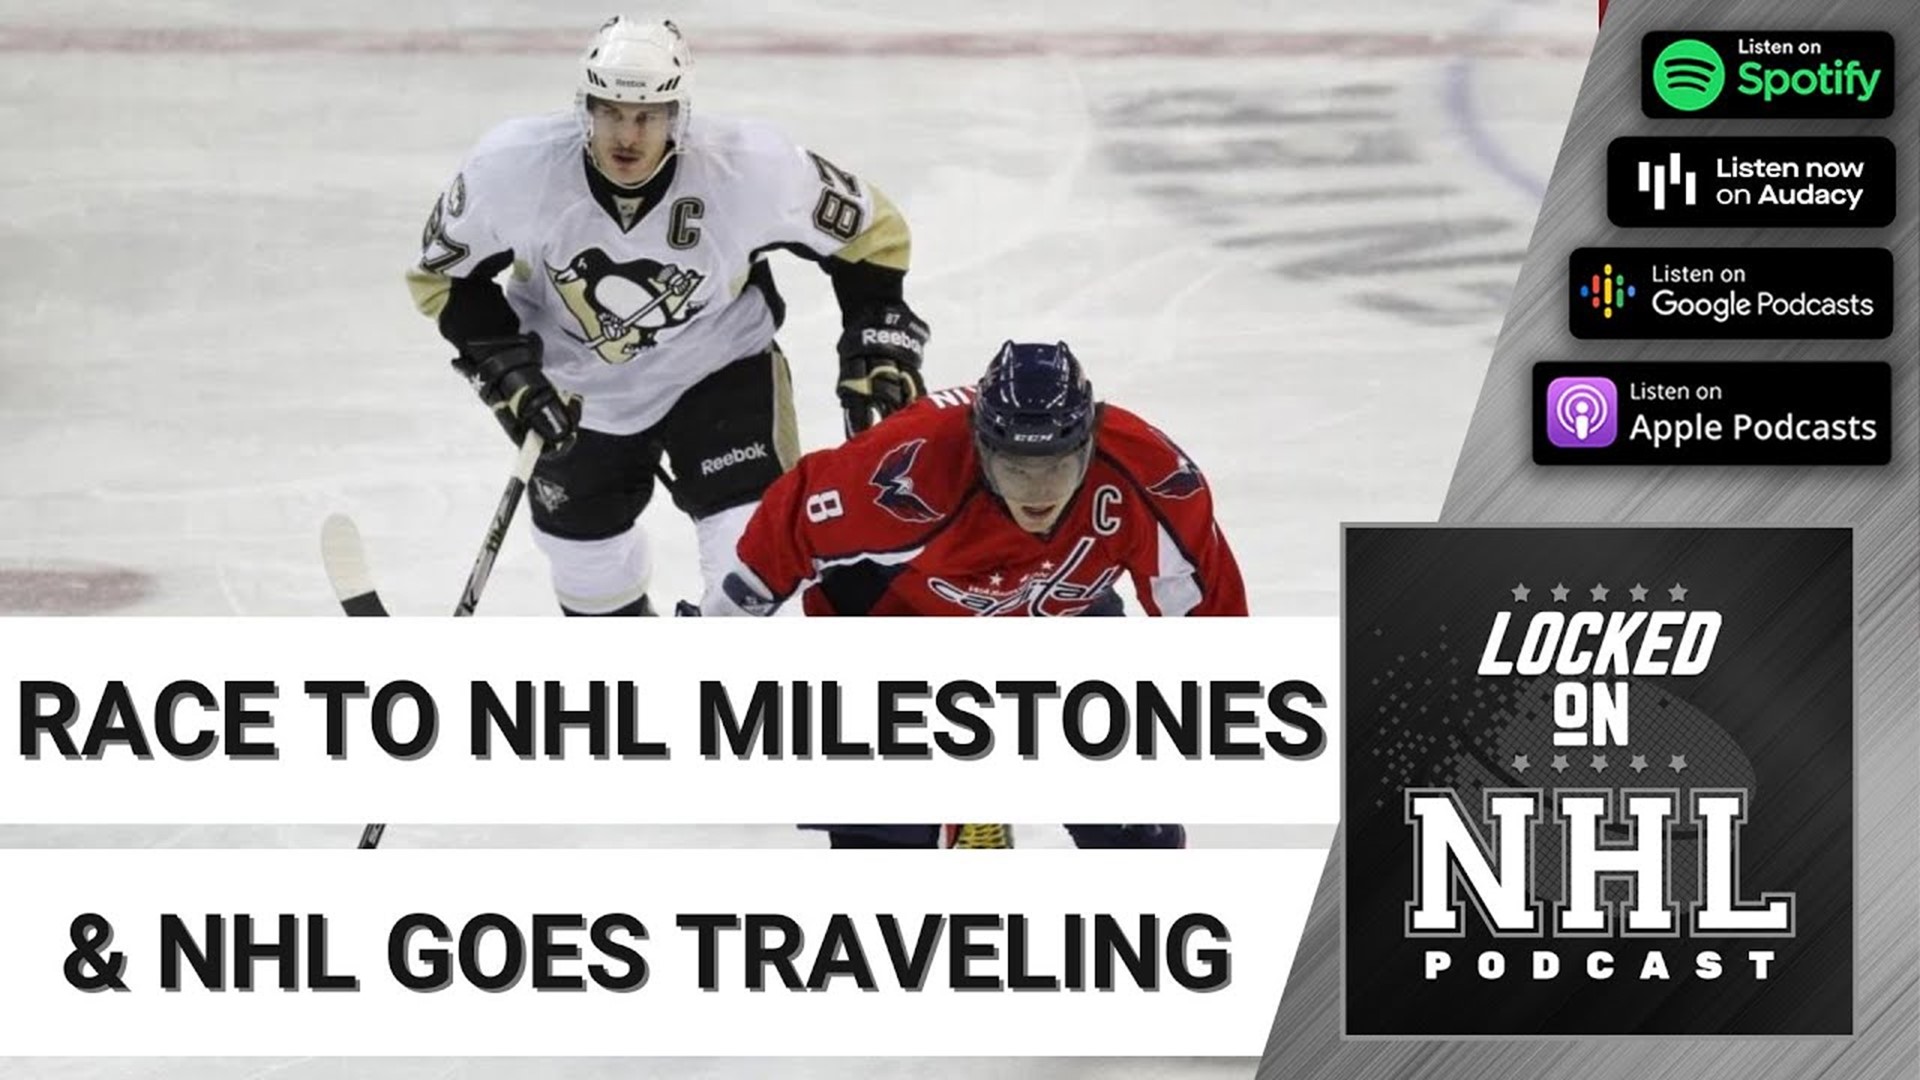 NHL Potential Milestones this season & Hockey Goes to New Places for the Pre-Season